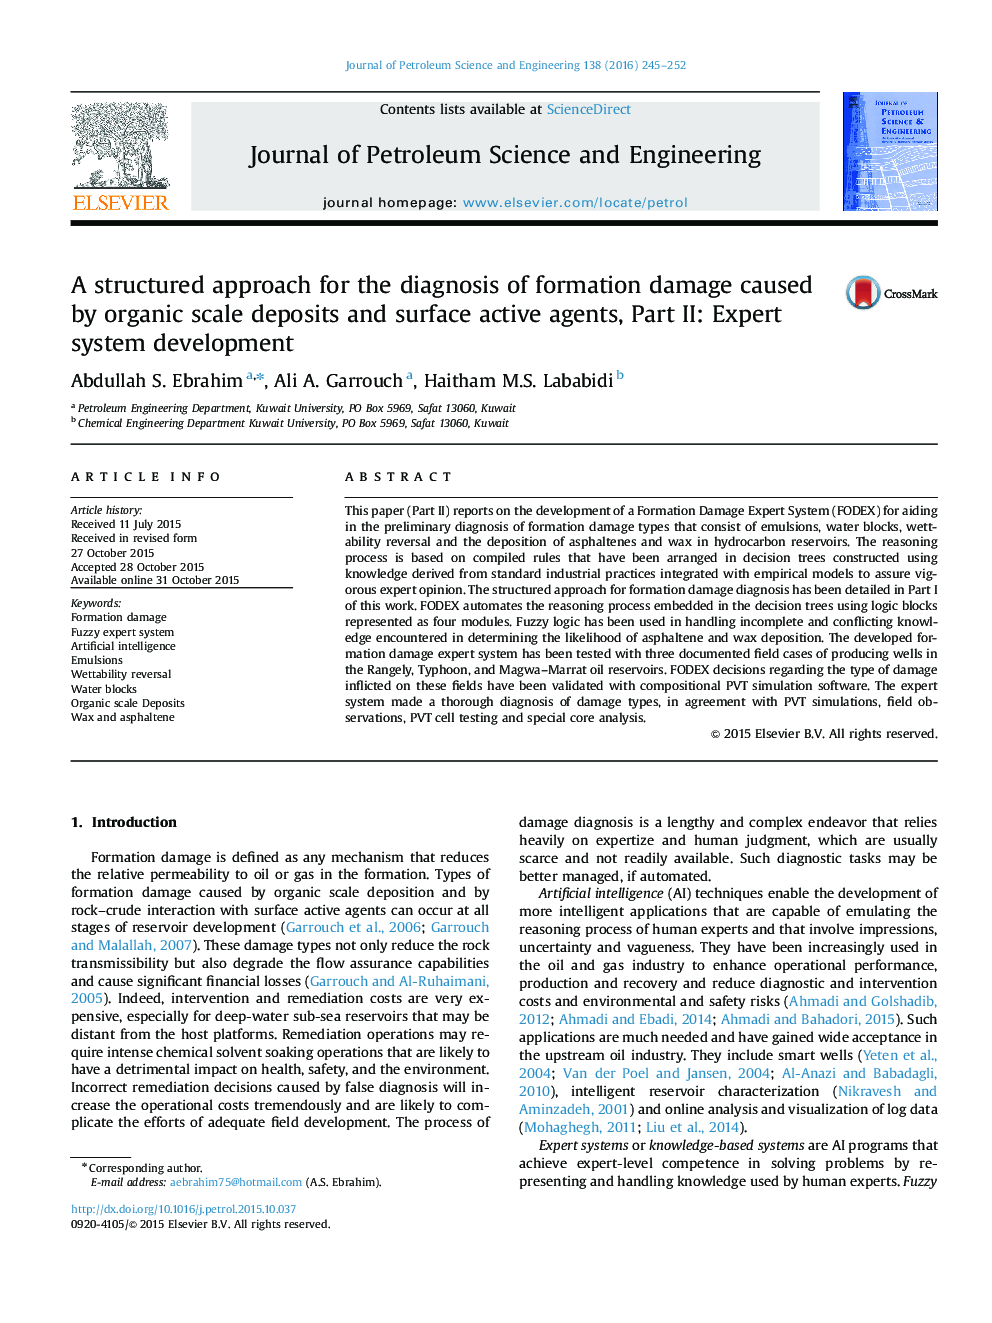 A structured approach for the diagnosis of formation damage caused by organic scale deposits and surface active agents, Part II: Expert system development